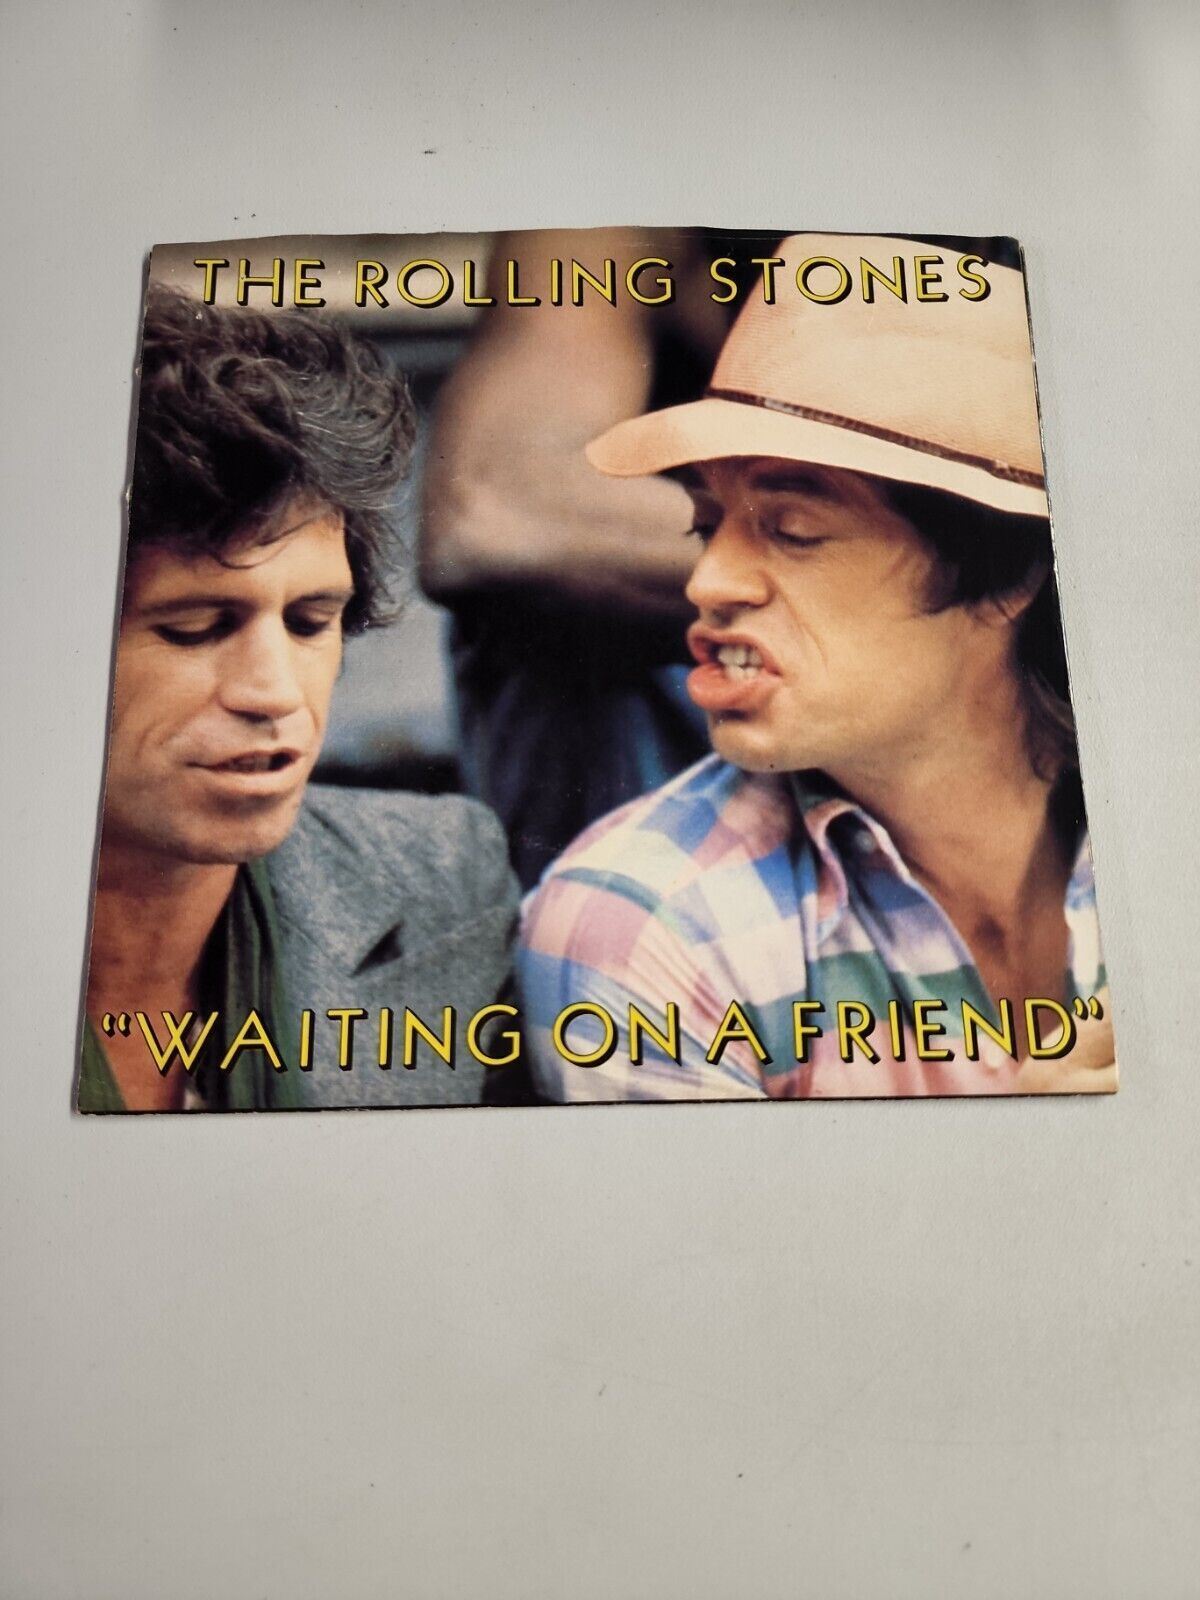 The Rolling Stones - Waiting on a Friend - Rolling Stone (45RPM 7”)(RC282) 